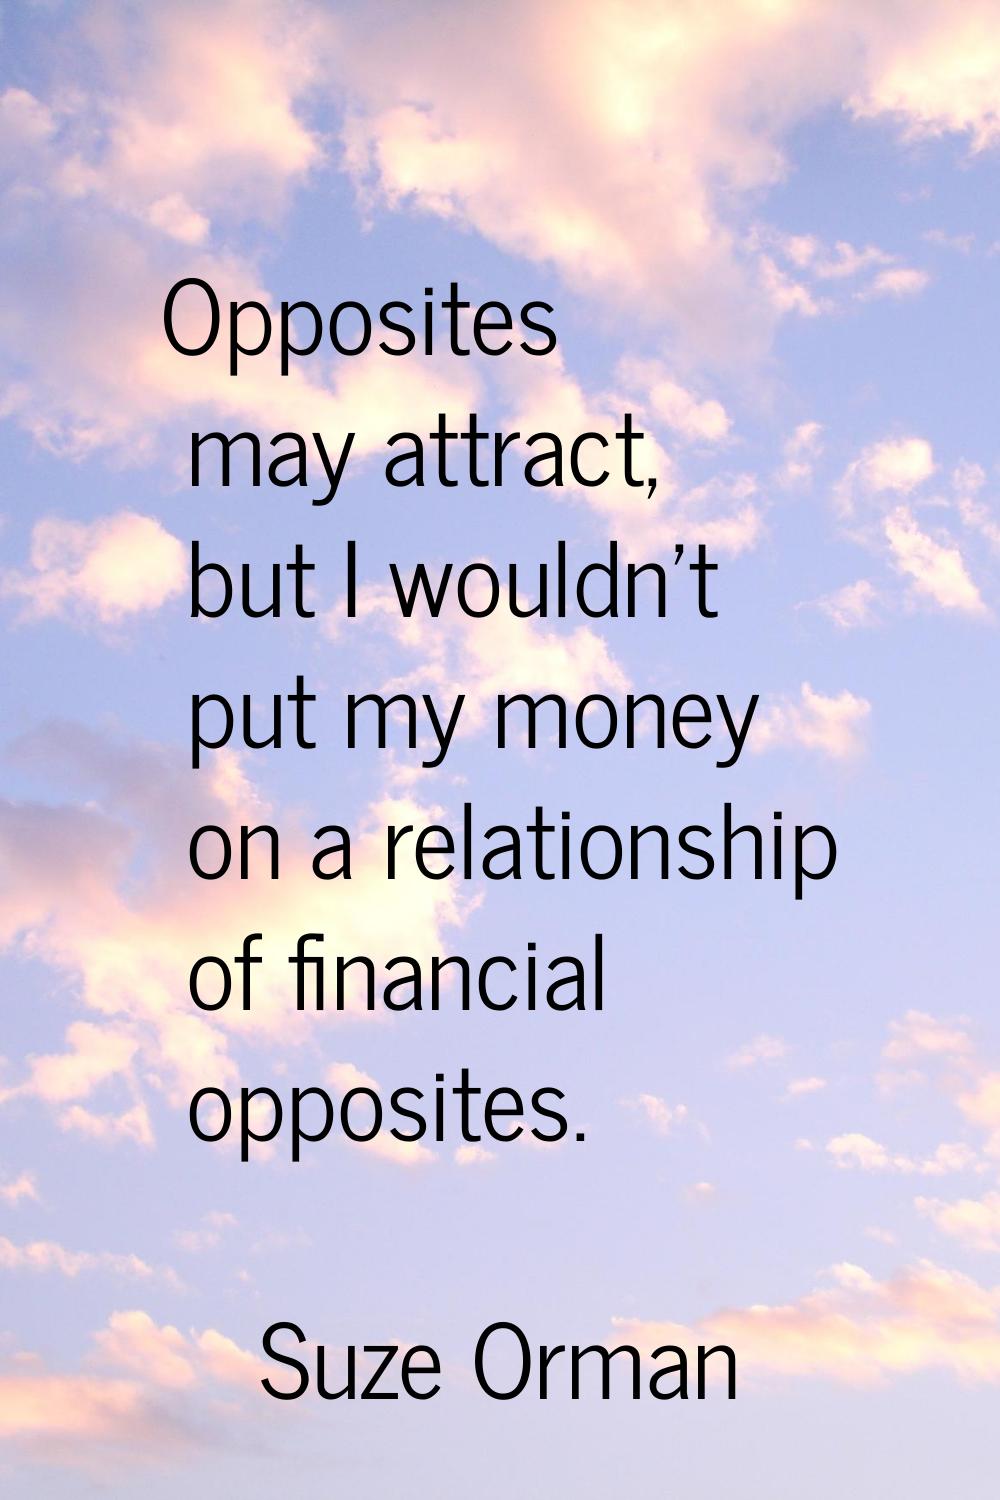 Opposites may attract, but I wouldn't put my money on a relationship of financial opposites.